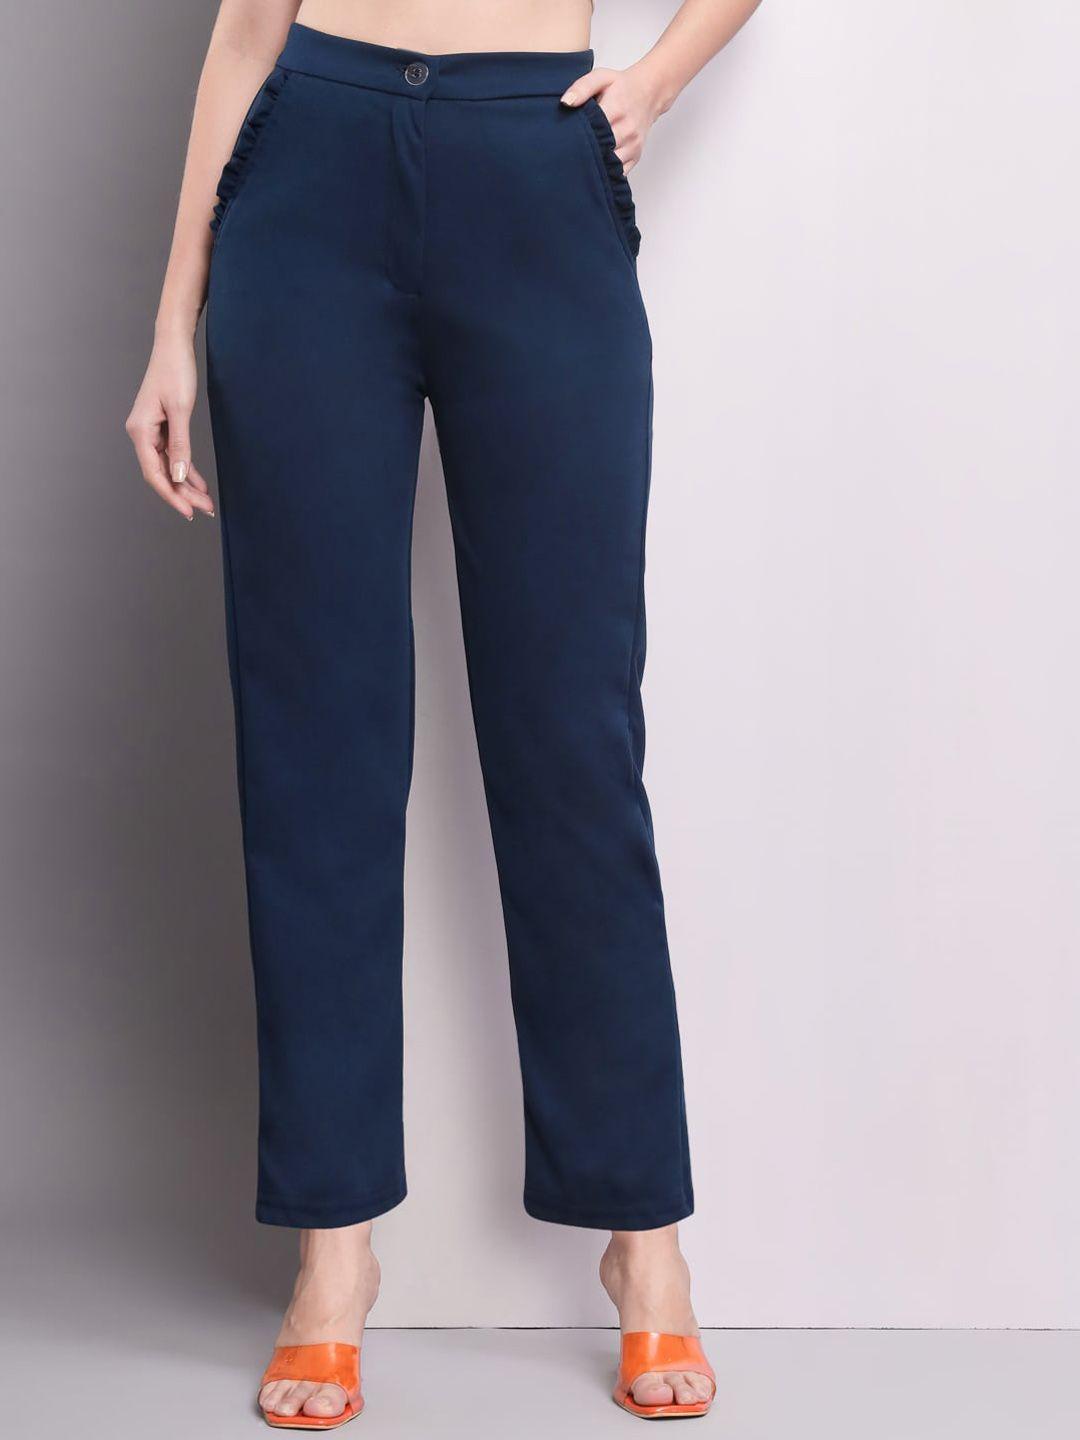 q-rious women flat-front mid-rise trousers